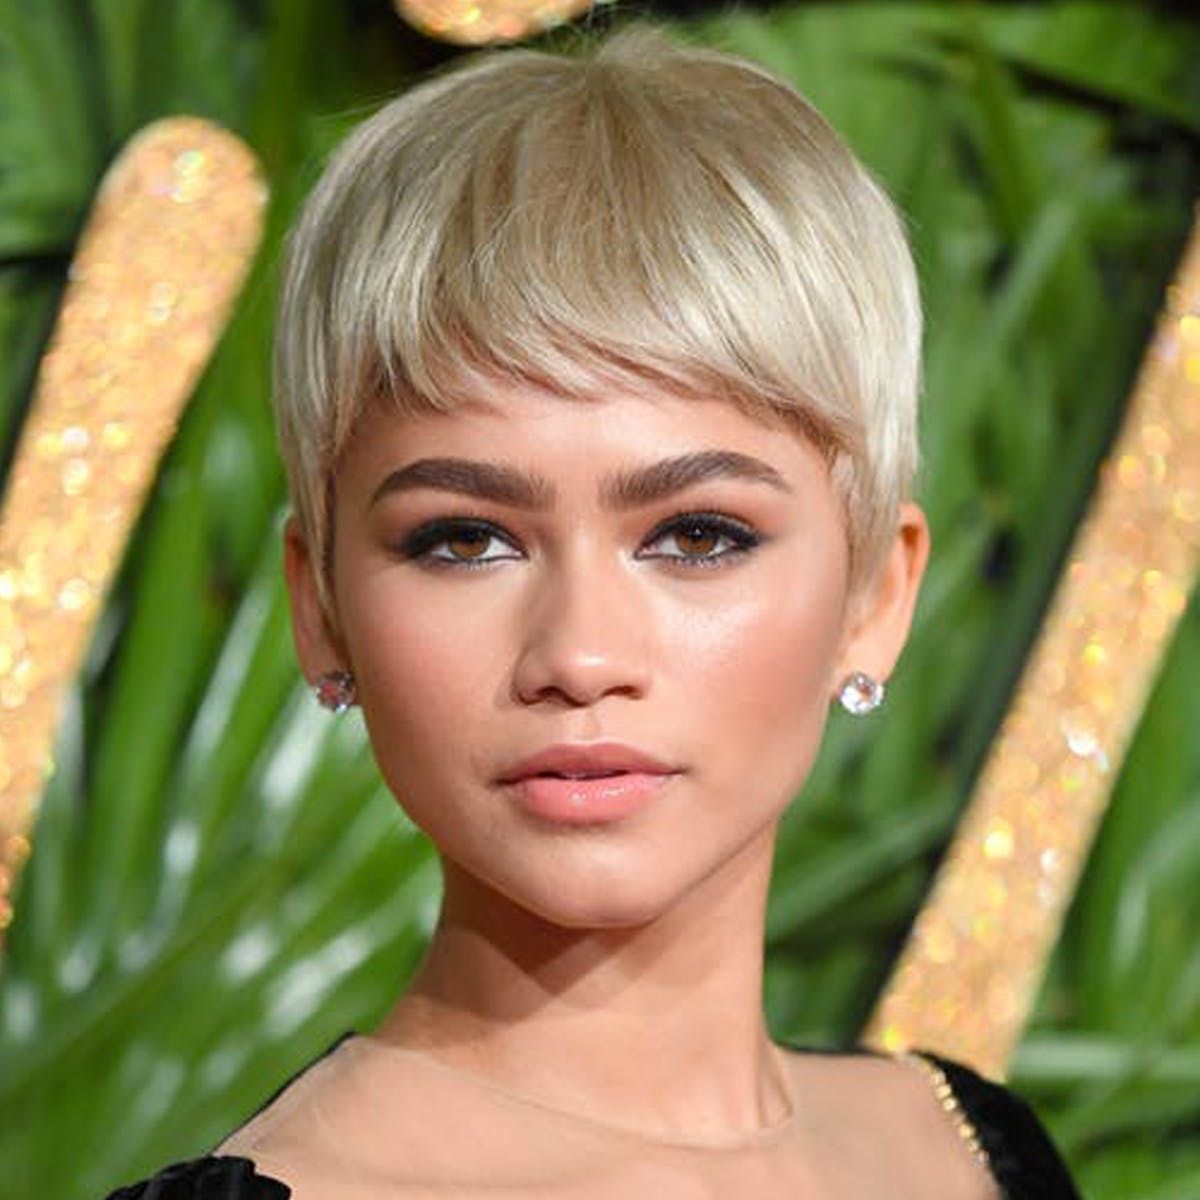 Celebrity Pixie Cuts That’ll Make You Take the Plunge